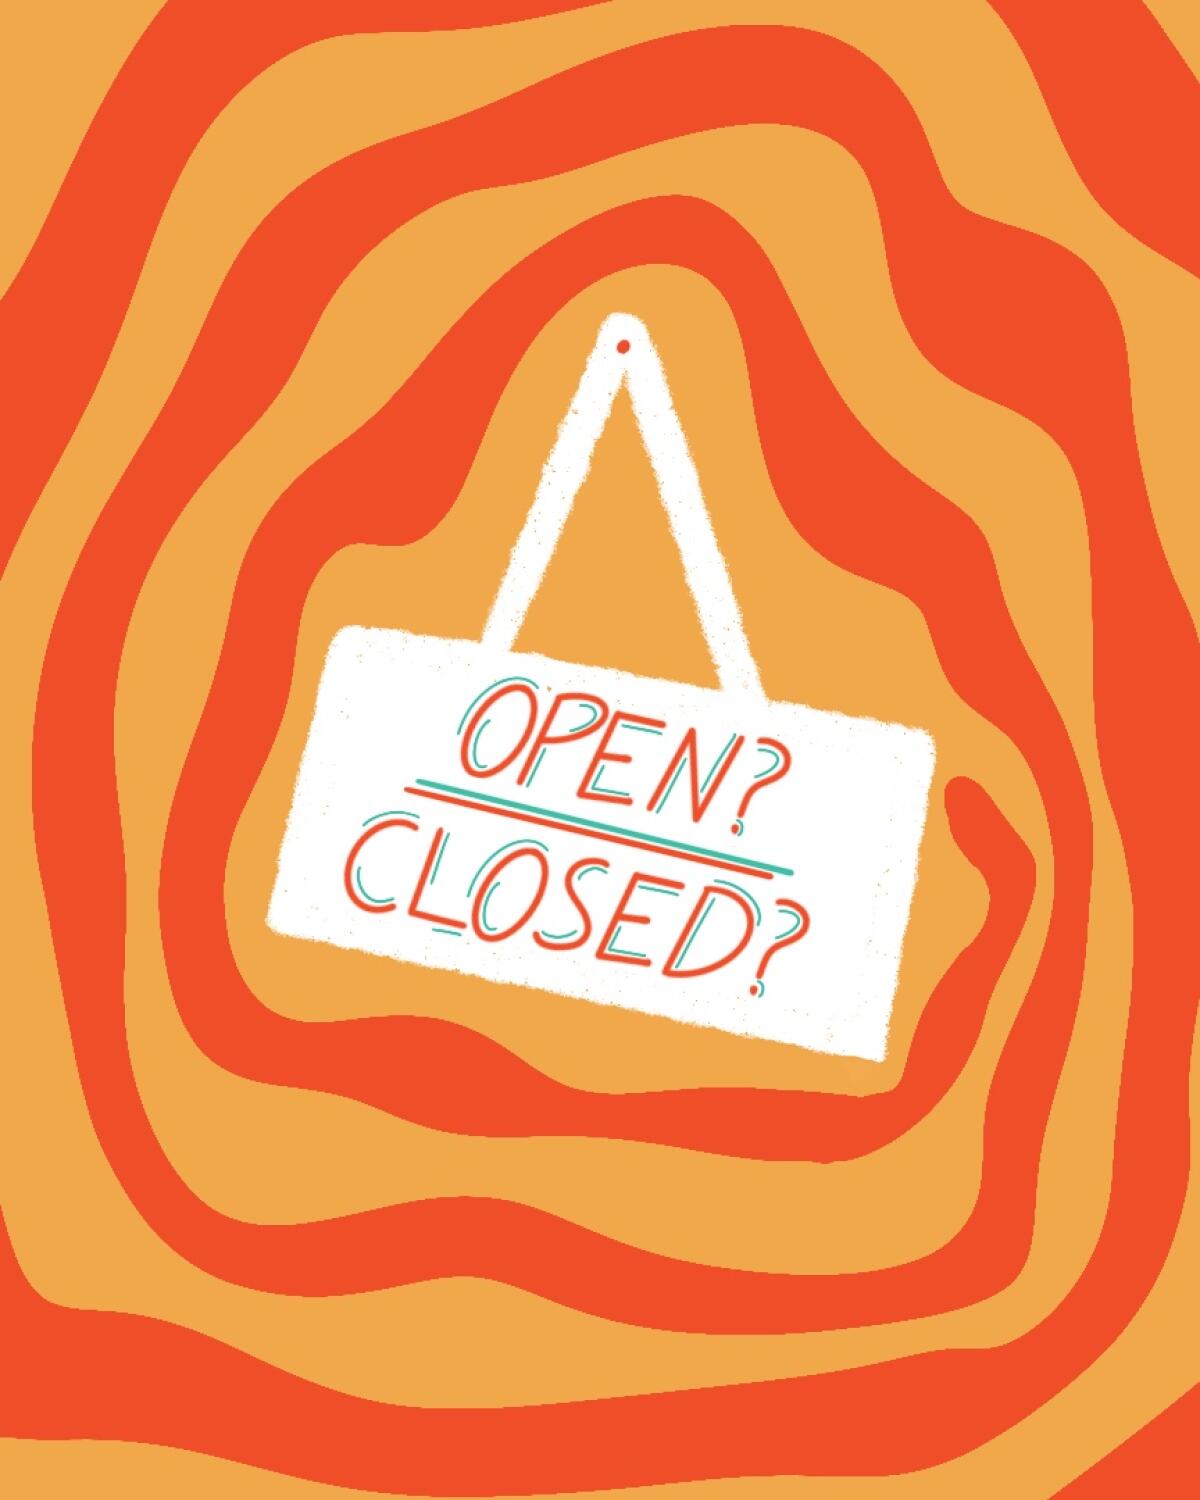 An illustration of a sign that indicates confusion over what's open and closed these days.